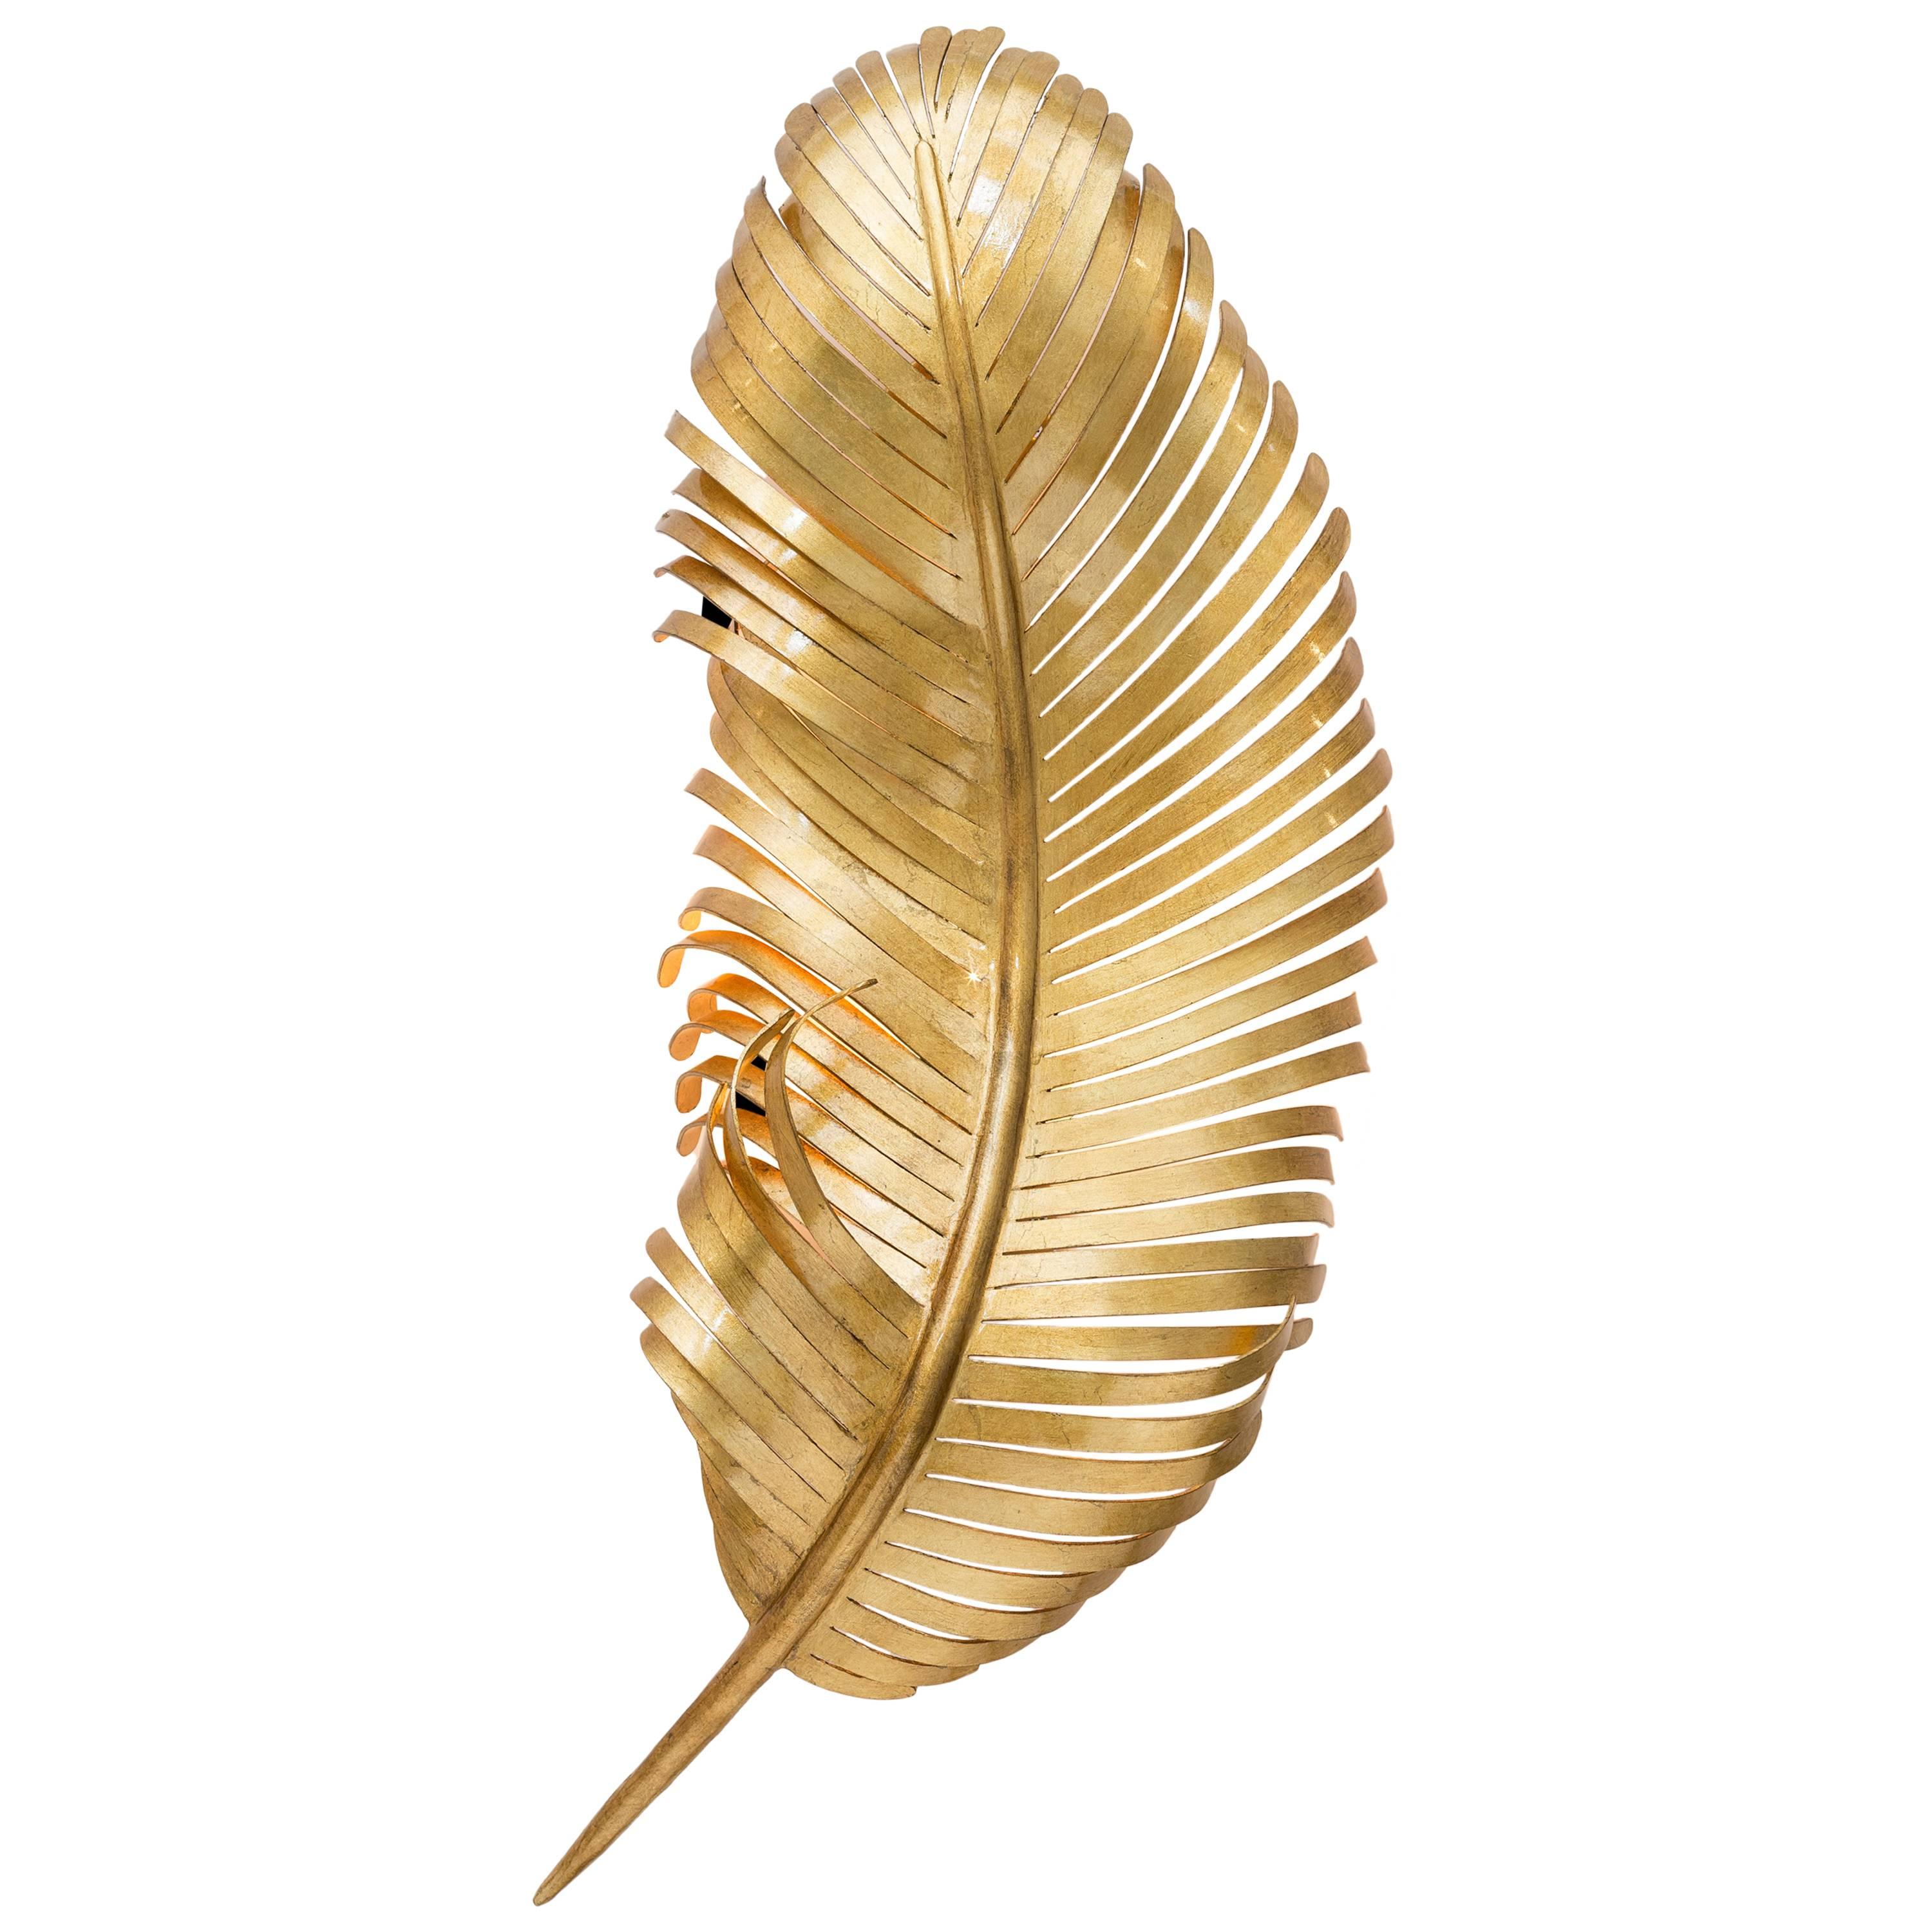 JOSETTE SCONCE - Modern Hand Forged Gold Leaf Feather Sconce